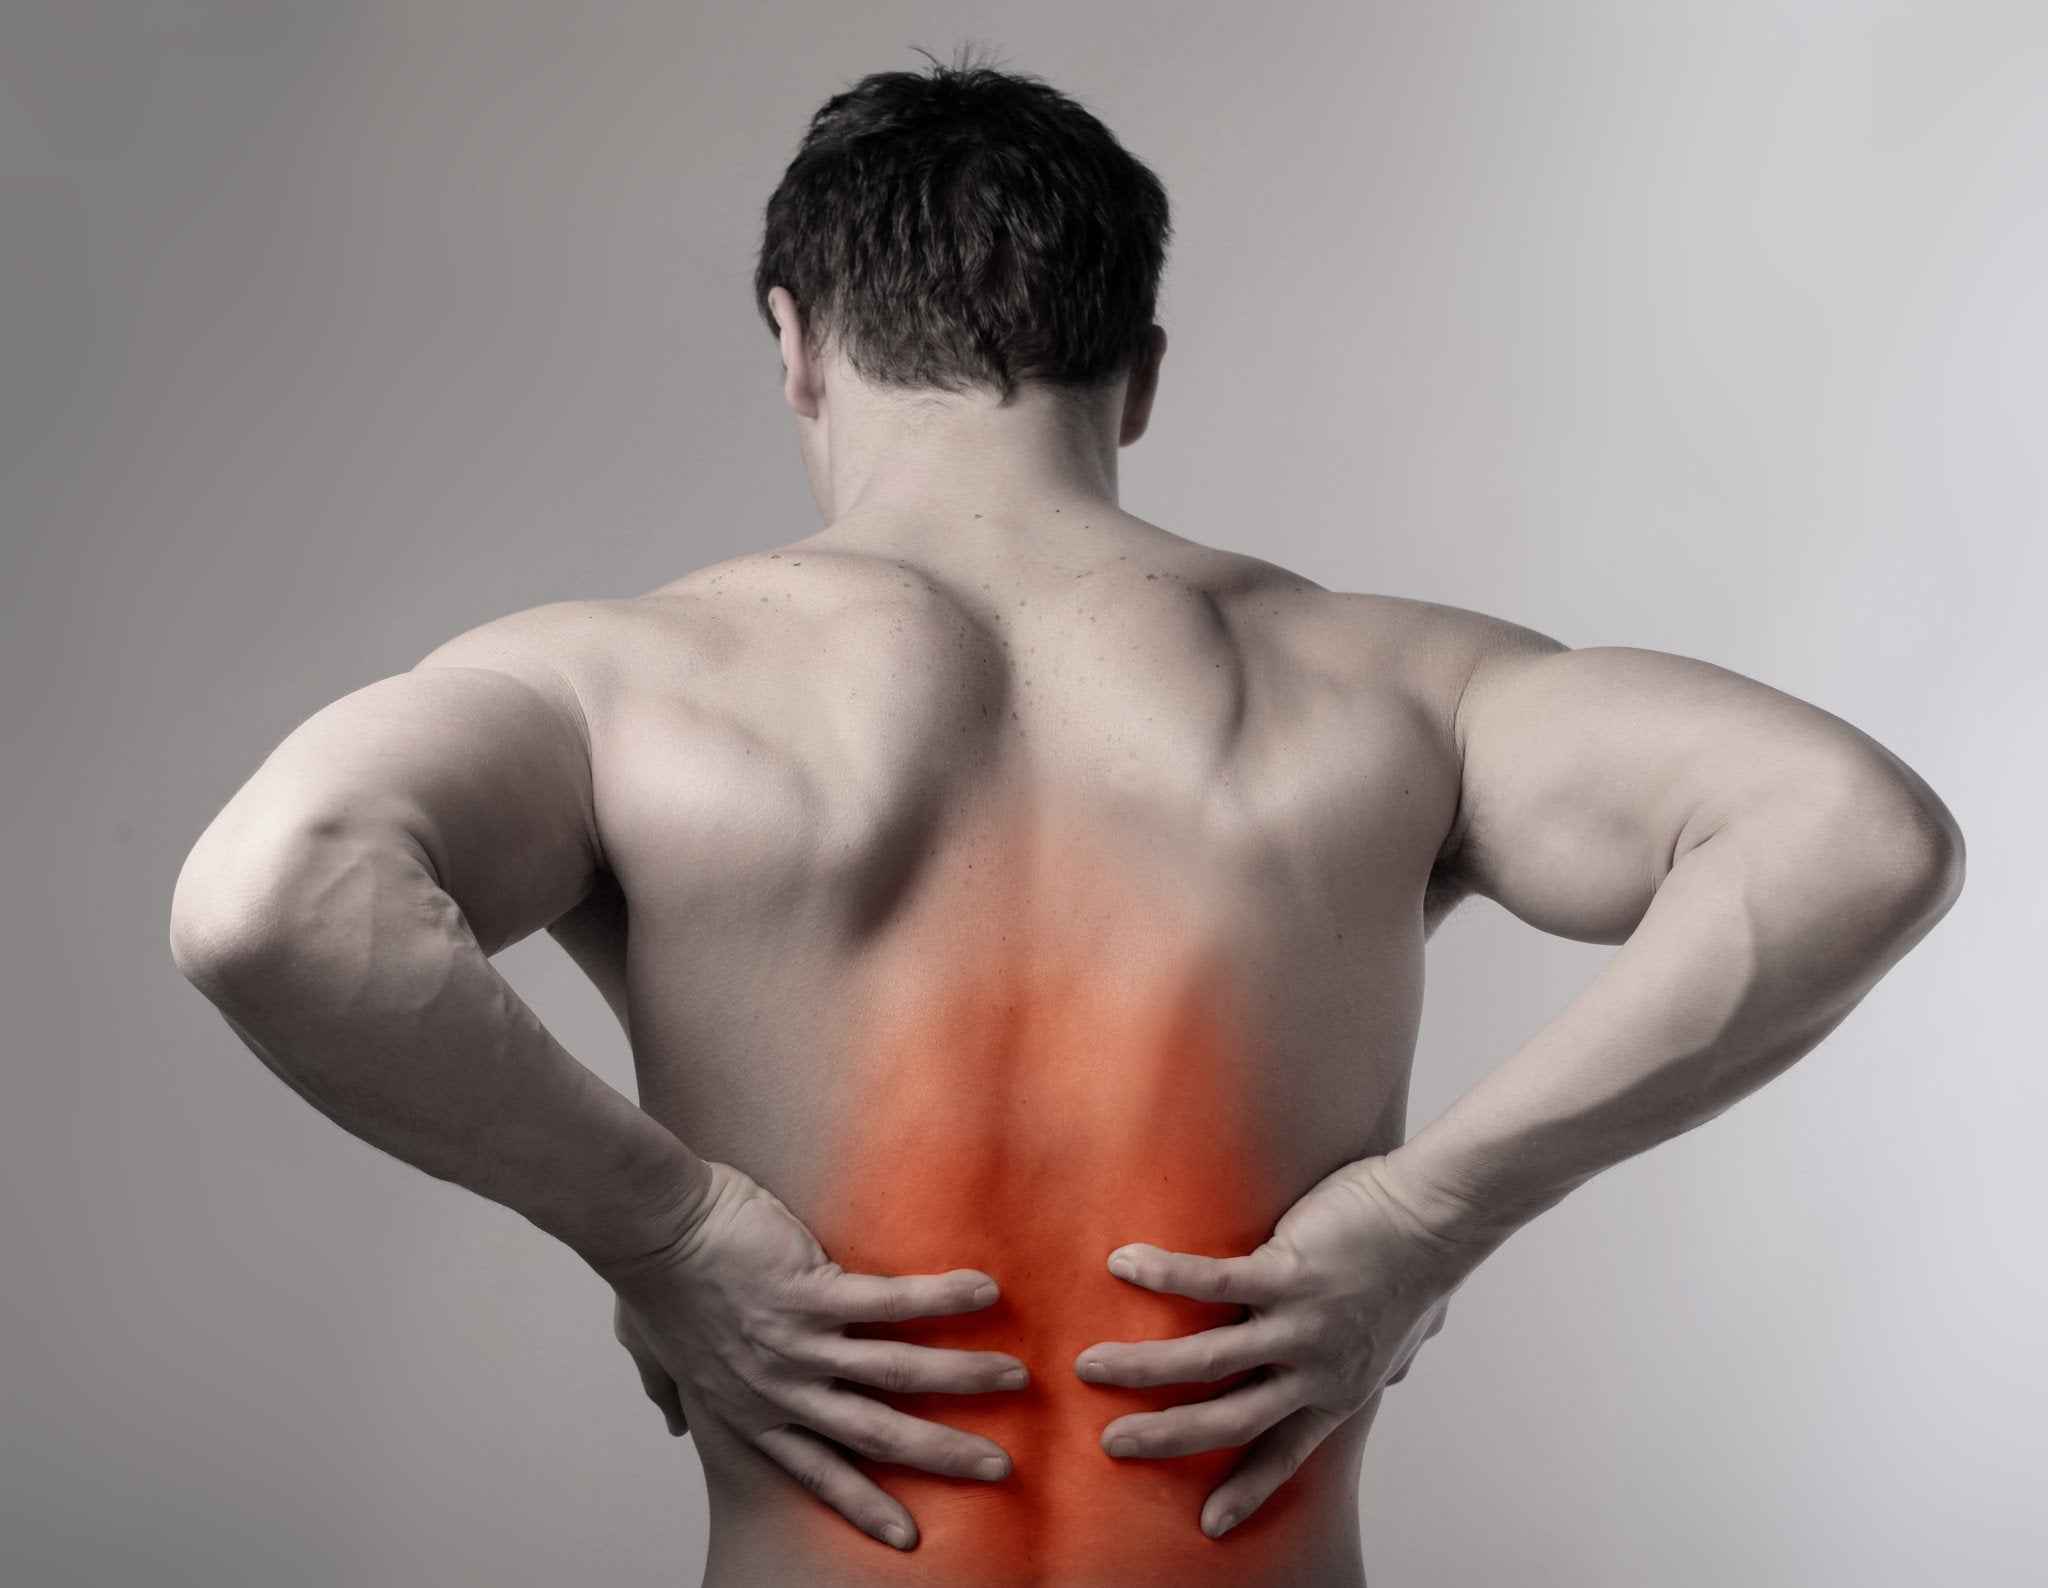 Heat Therapy Benefits For Back Pain